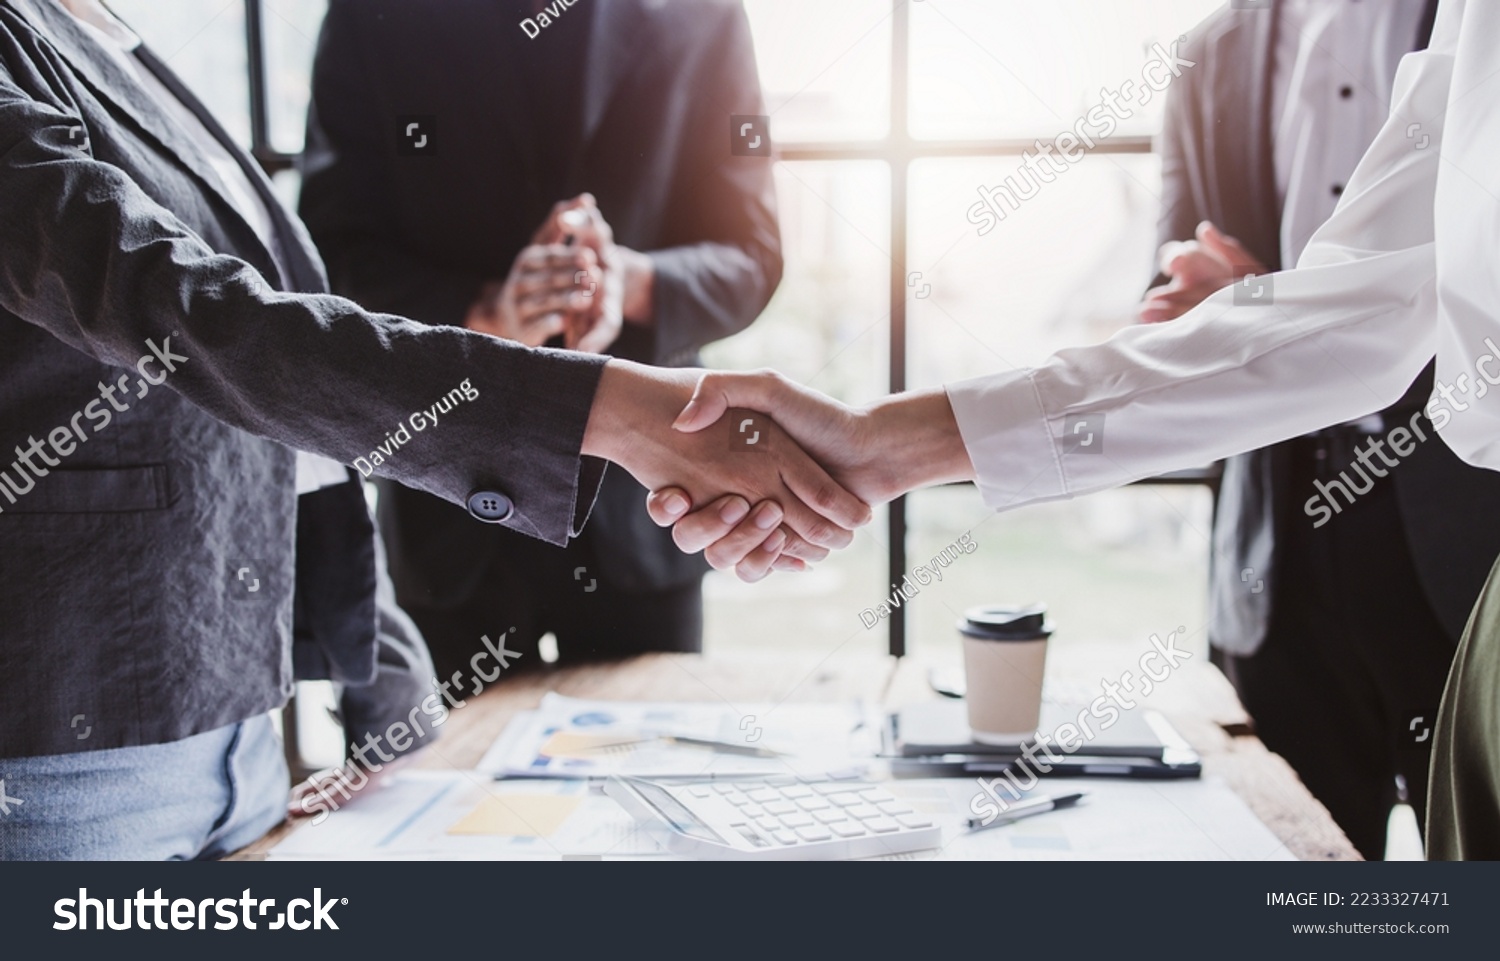 Business handshake for teamwork of business merger and acquisition,successful negotiate,hand shake,two businessman shake hand with partner to celebration partnership and business deal concept #2233327471